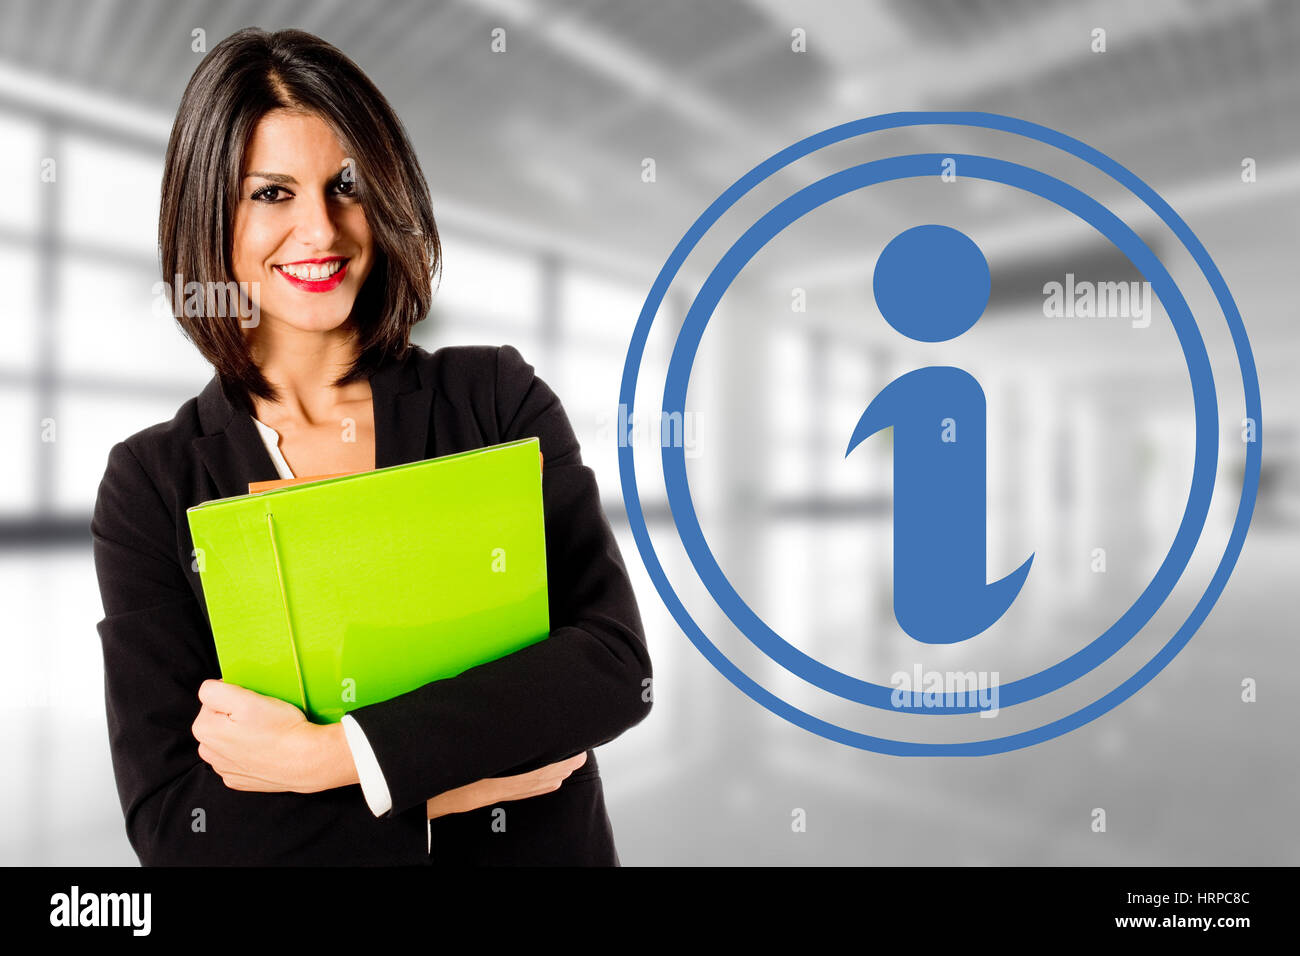 smiling business woman consumer information Stock Photo